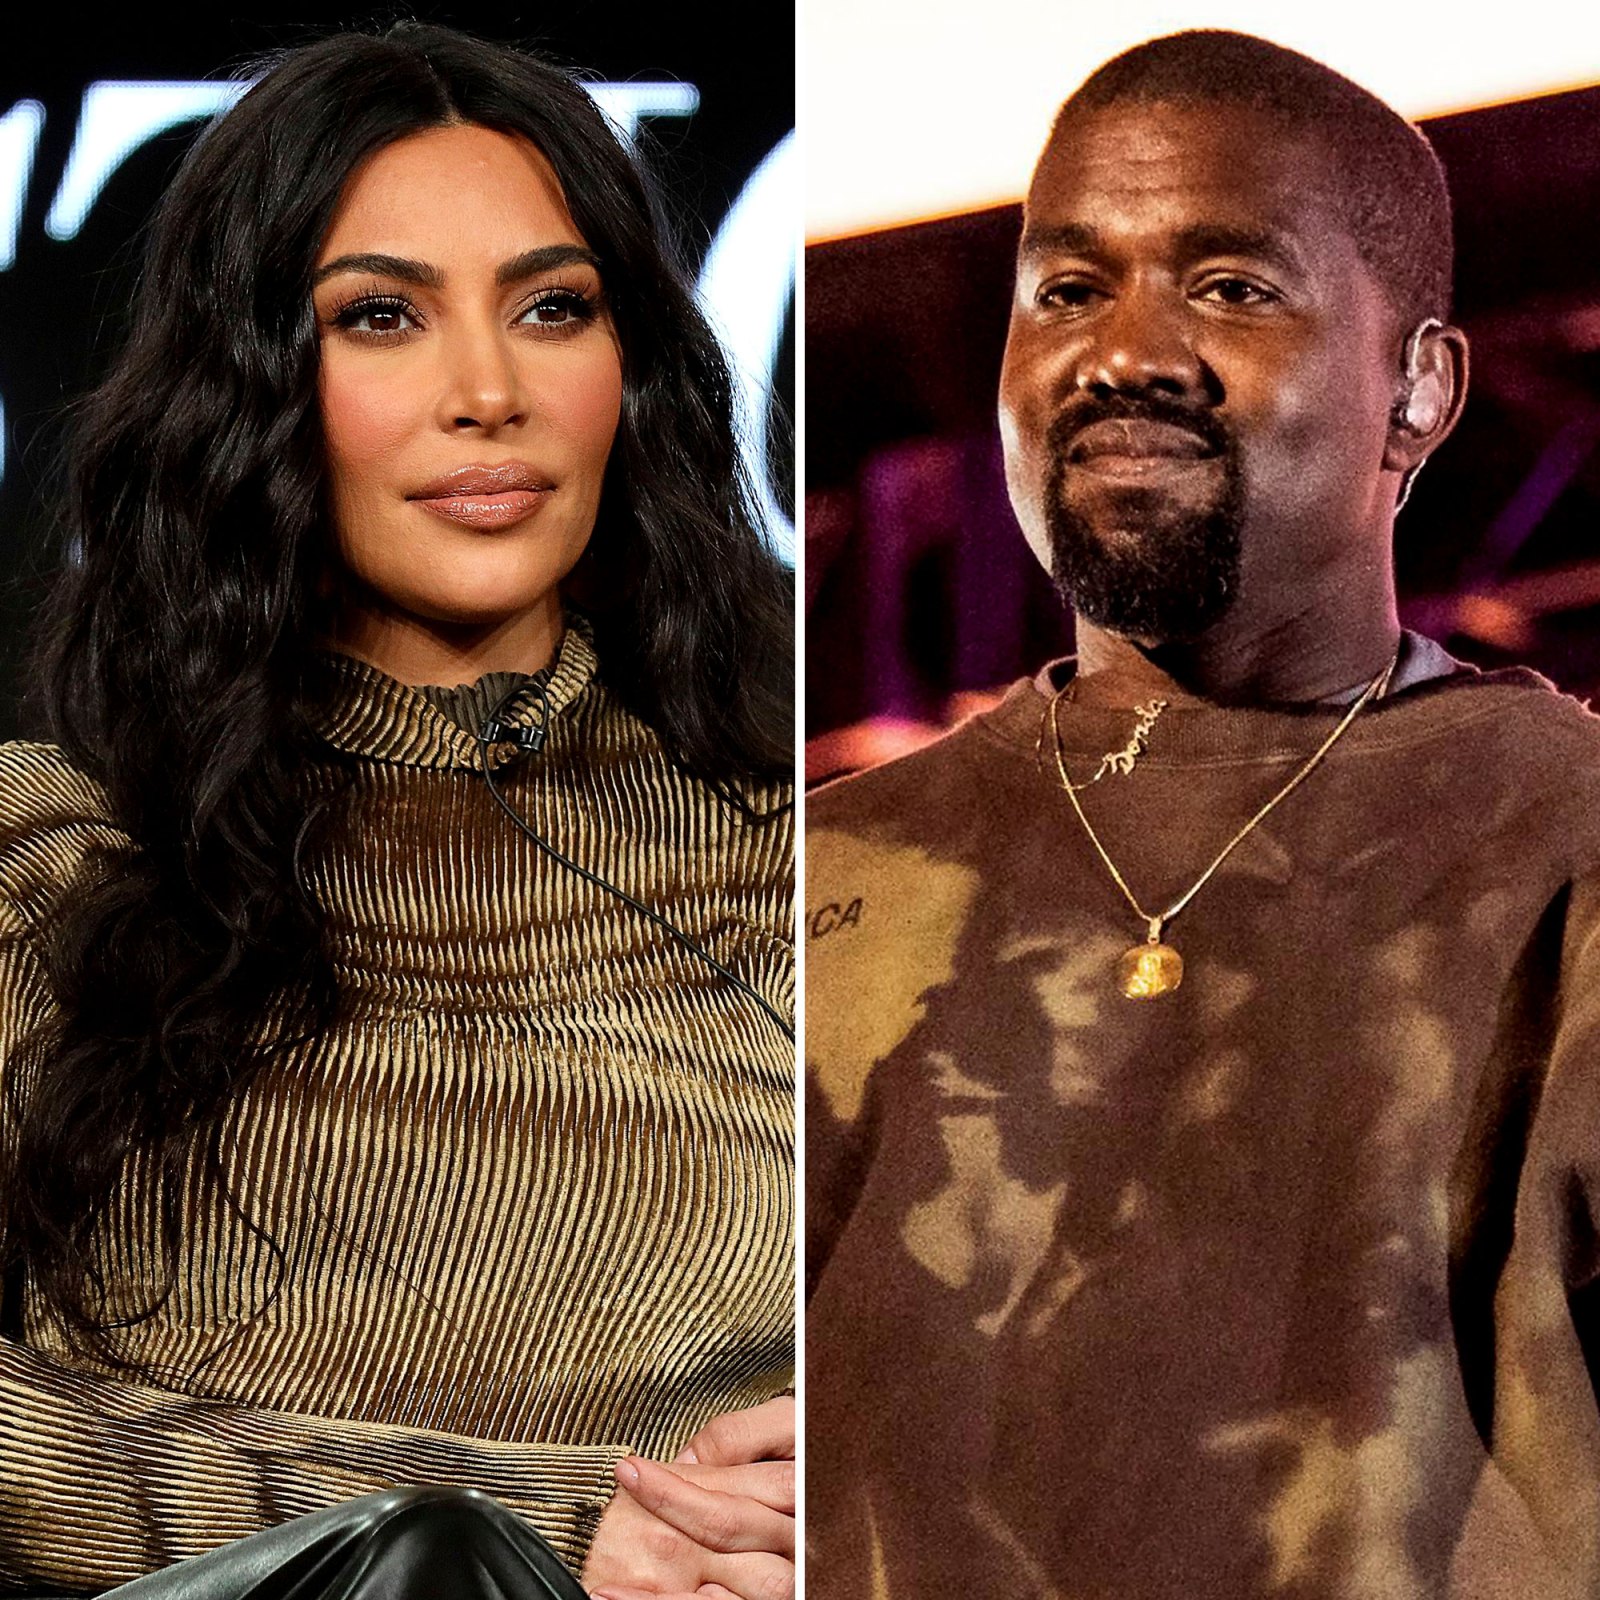 Kim Kardashian Says Taking the ‘High Road’ While Coparenting With Kanye West Is ‘Hard’